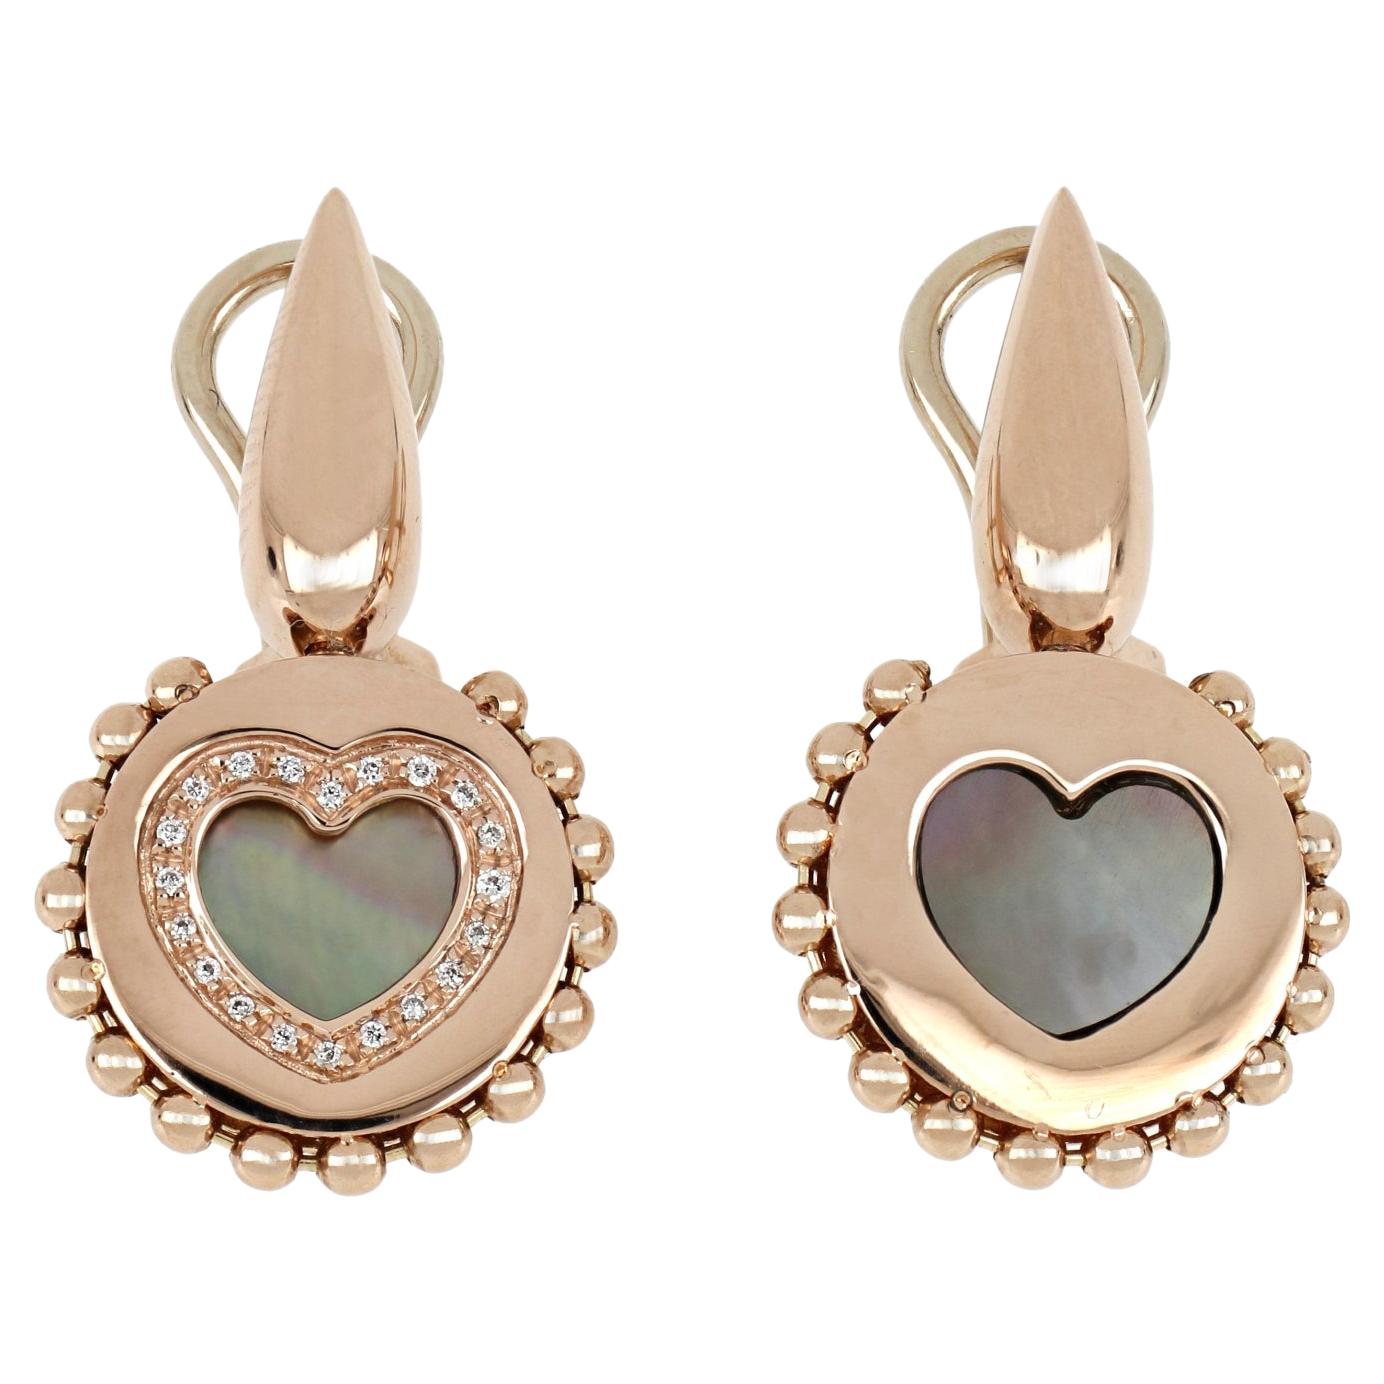 18kt Rose Gold Reverse Earrings "Heart" with Diamonds and Mother-of-pearl Insert